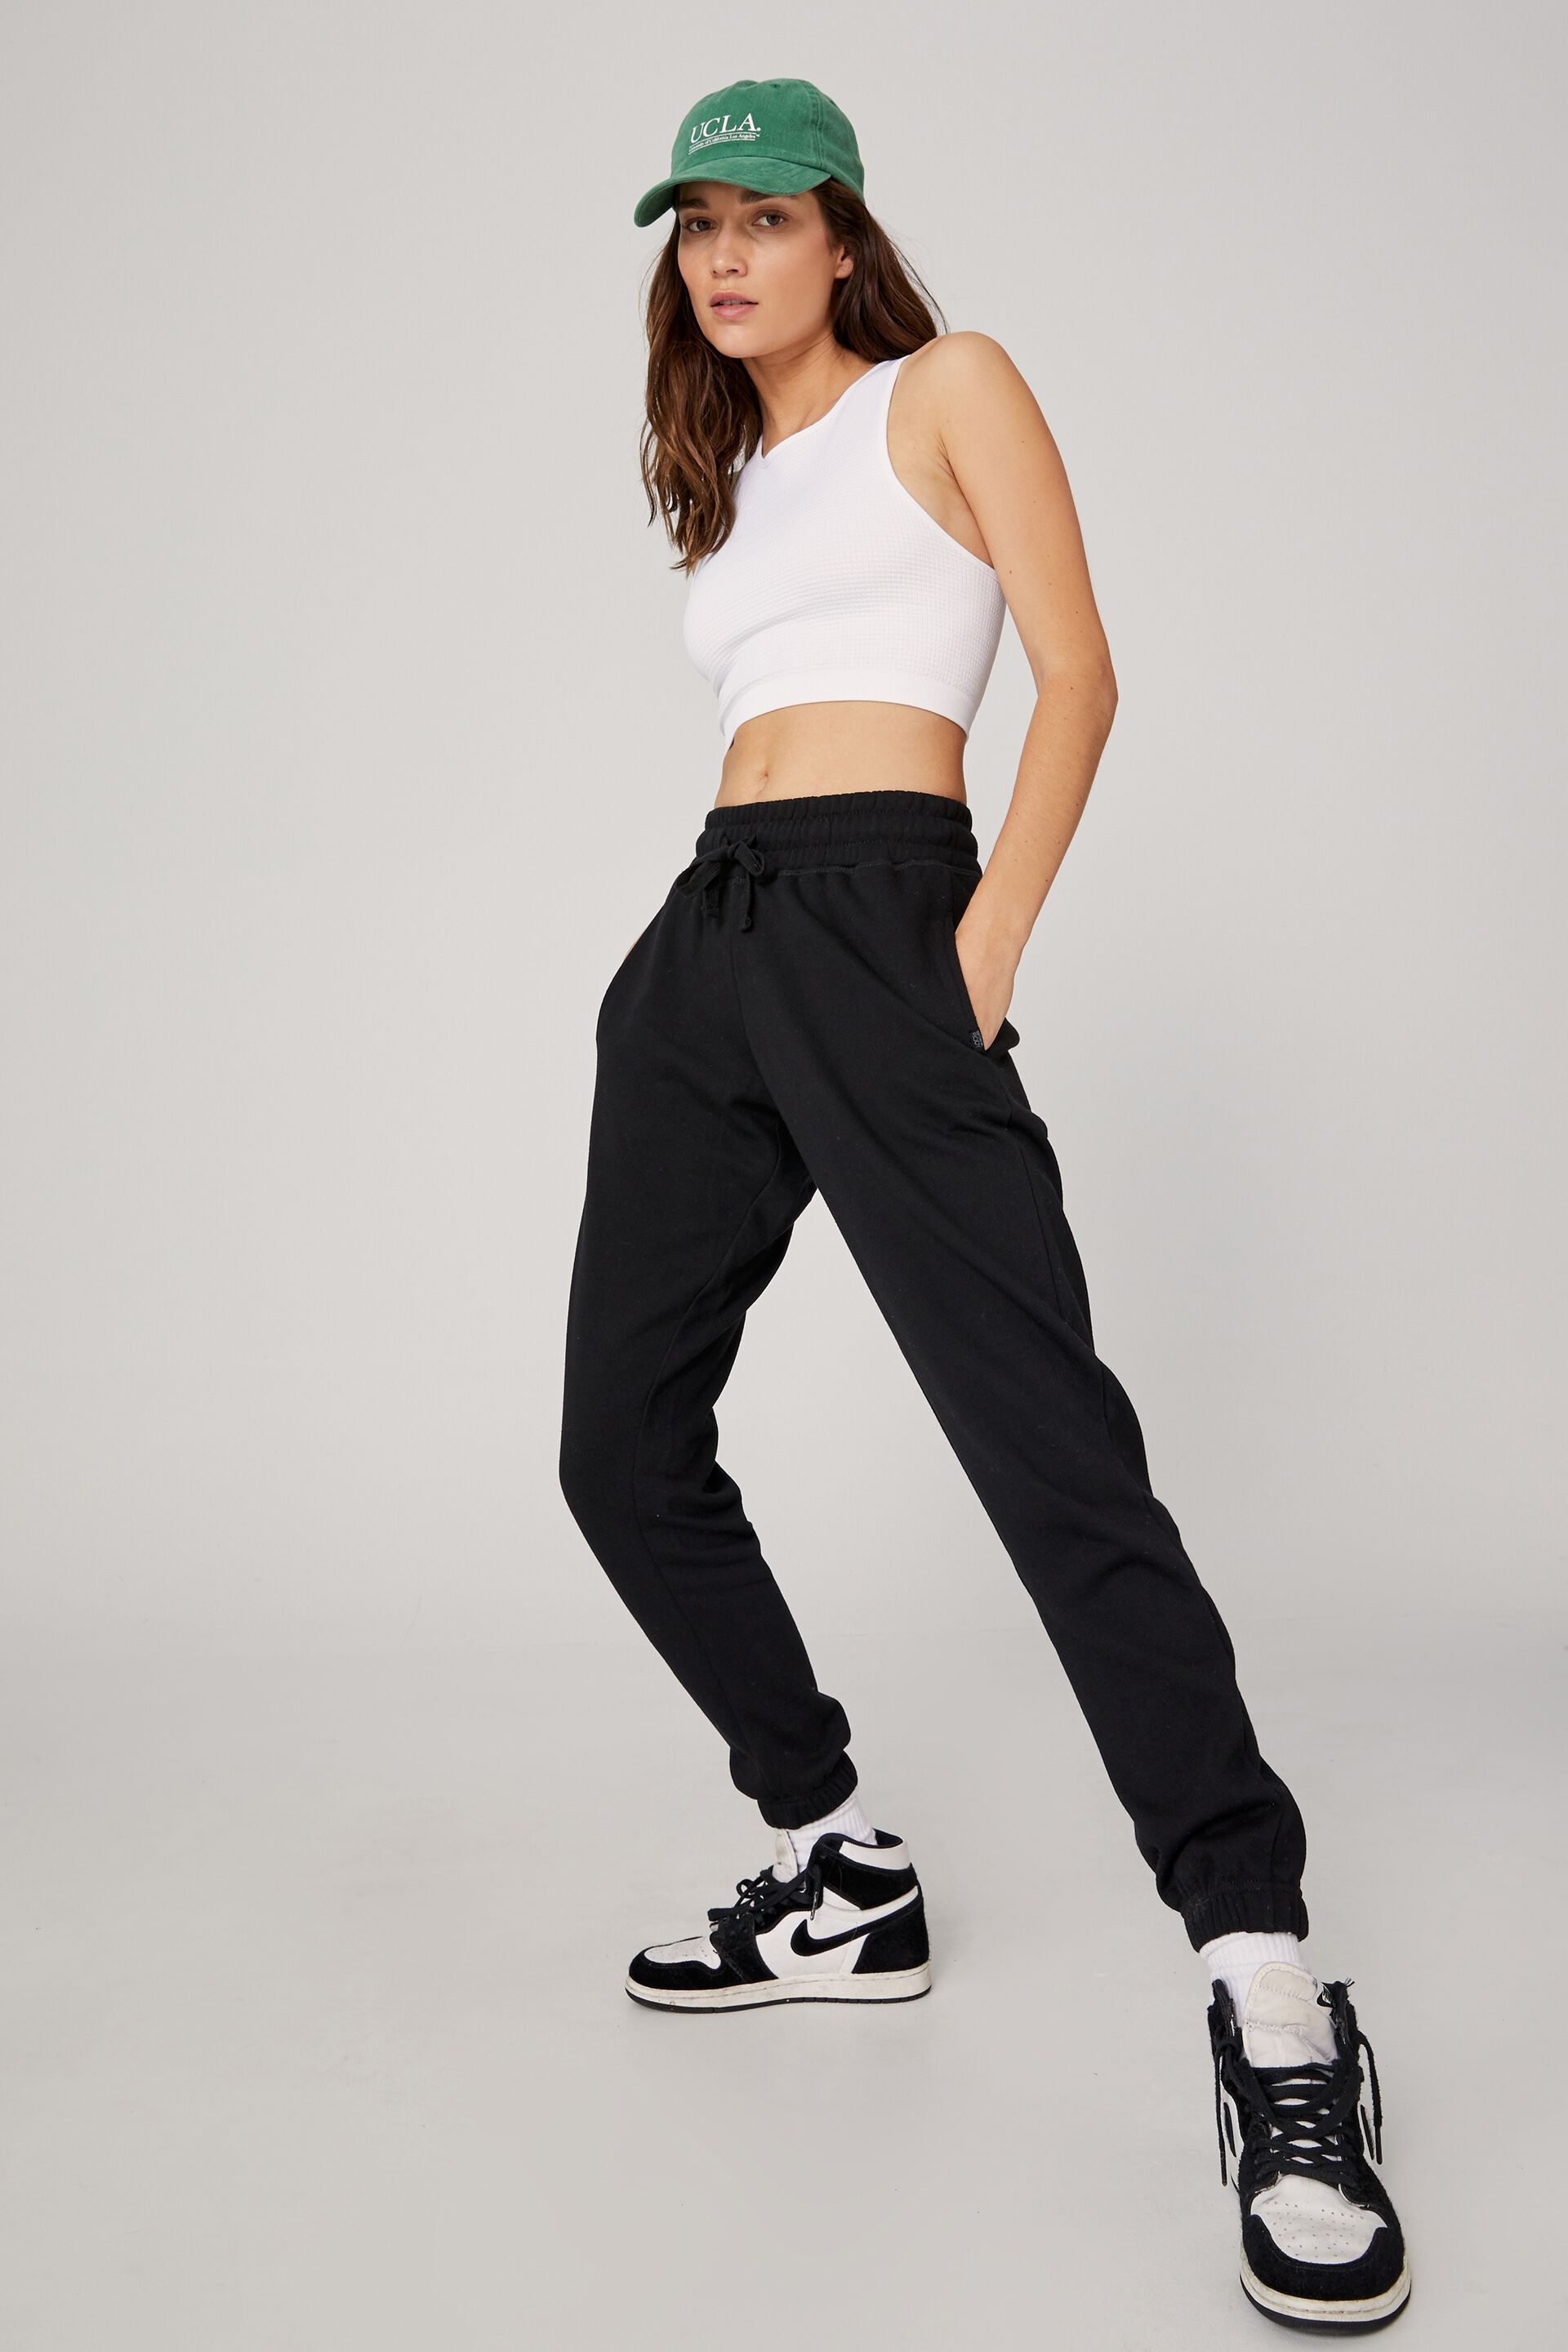 Athleisure Mighty Tech Mesh Jogger pants for Women | Gym Aesthetics